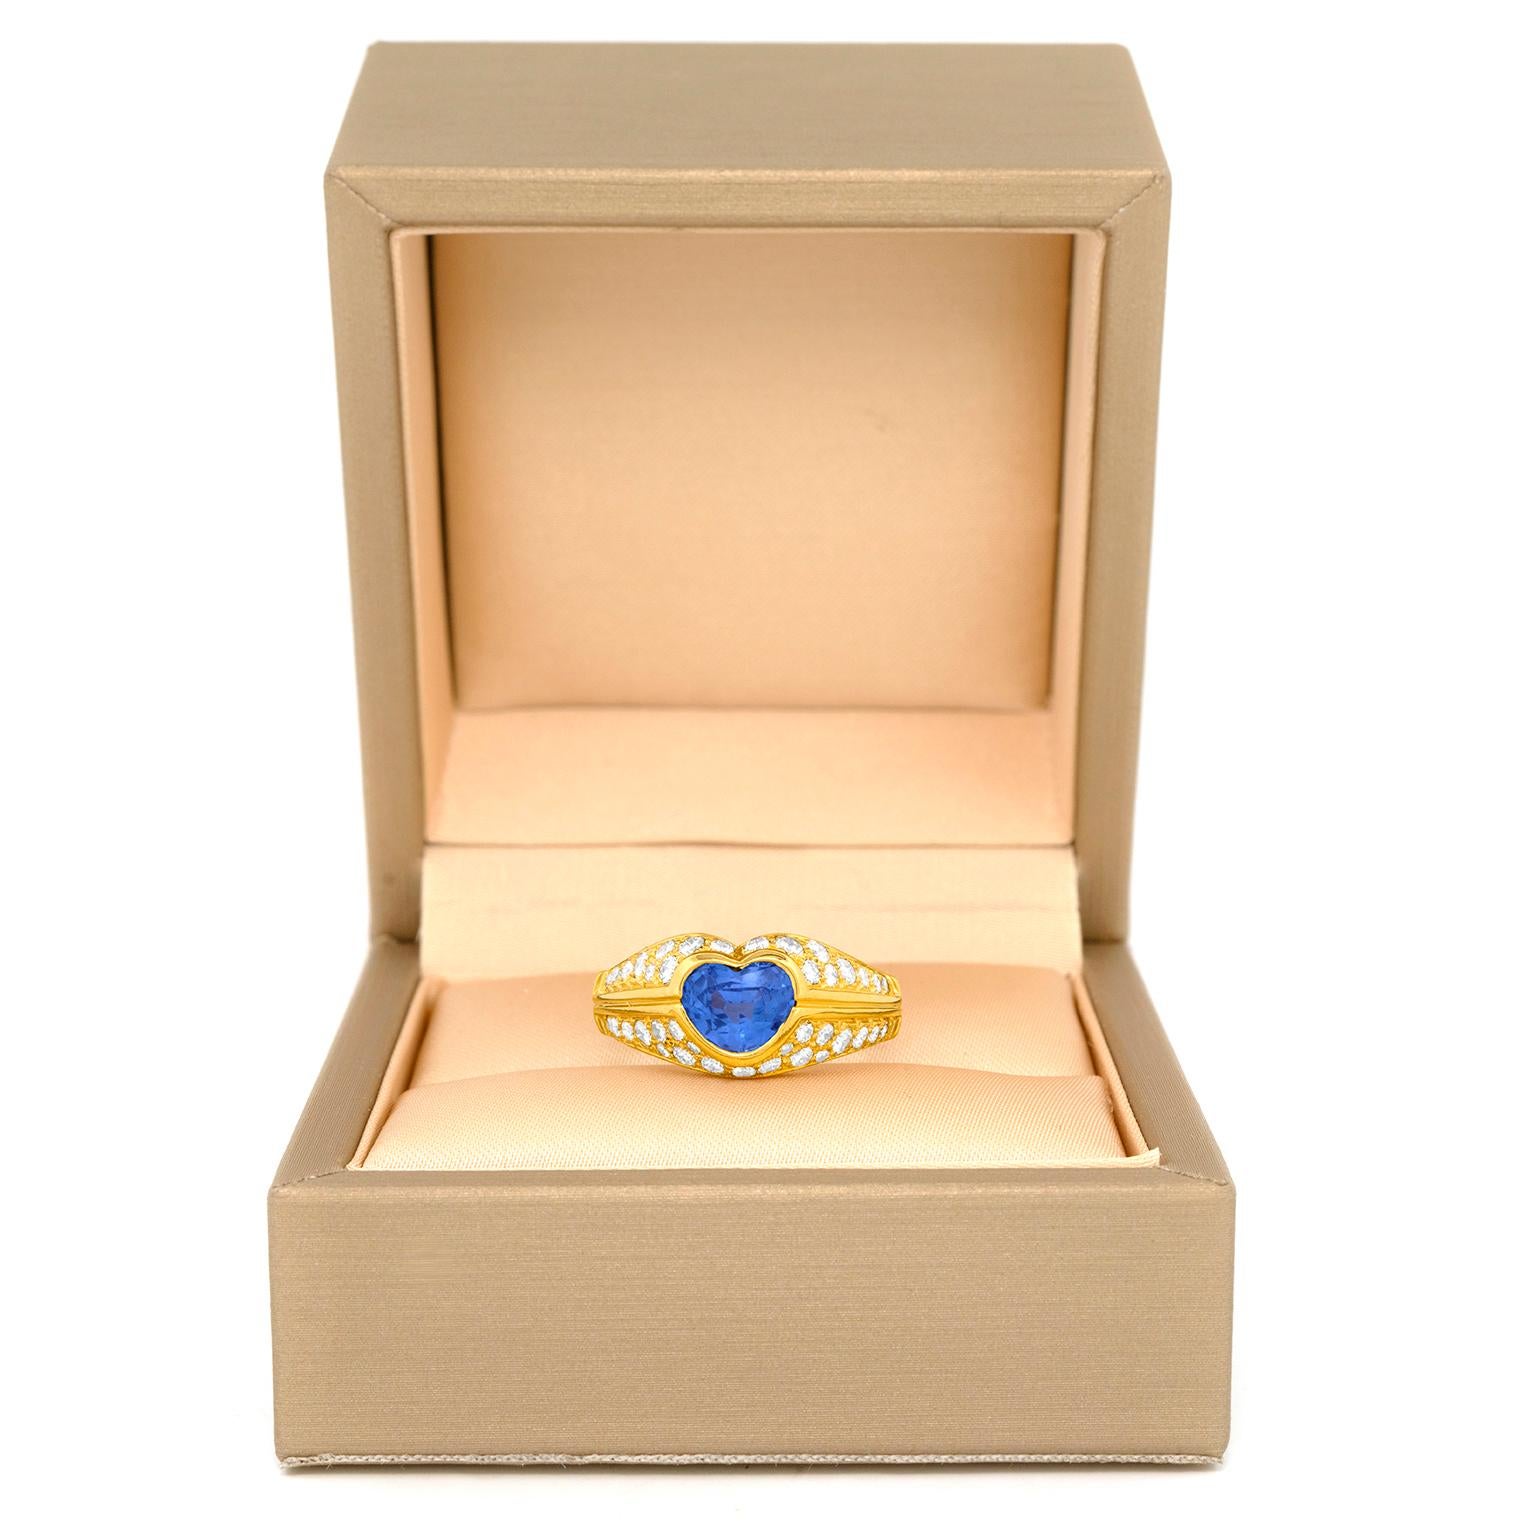 Bvlgari Sapphire and Diamond Ring In Excellent Condition For Sale In Litchfield, CT